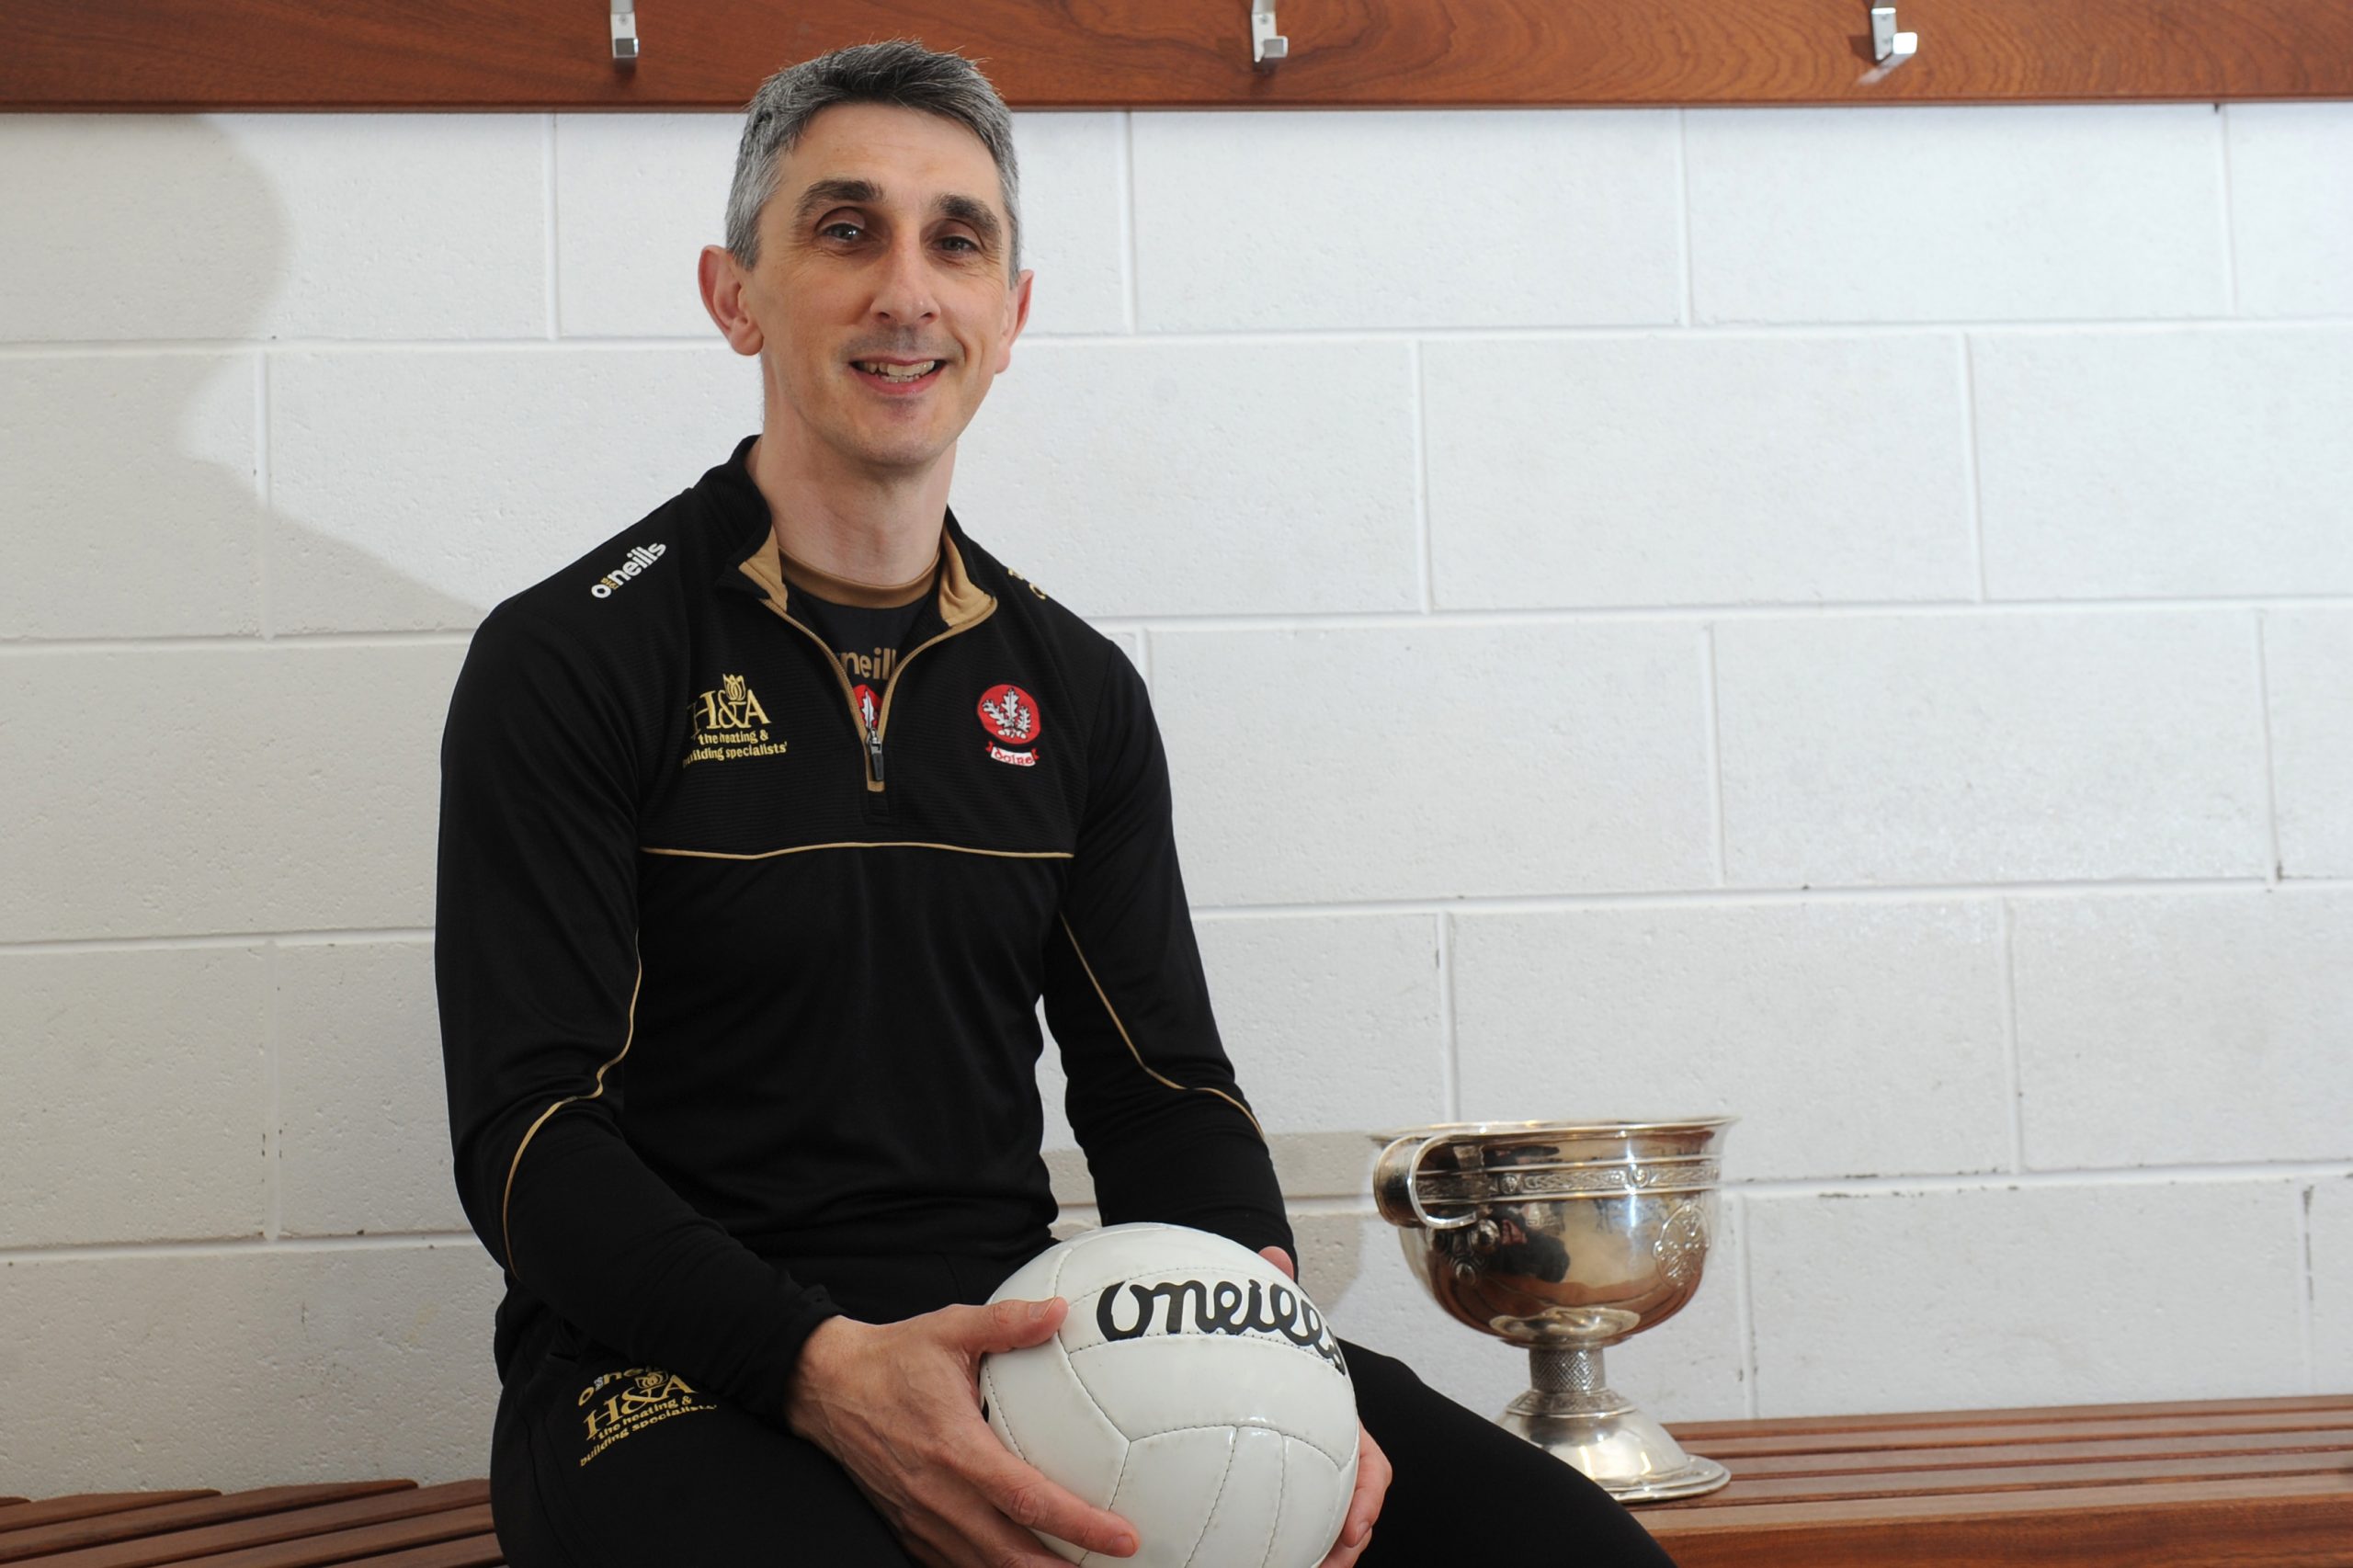 Derry manager Campbell happy with championship preparation